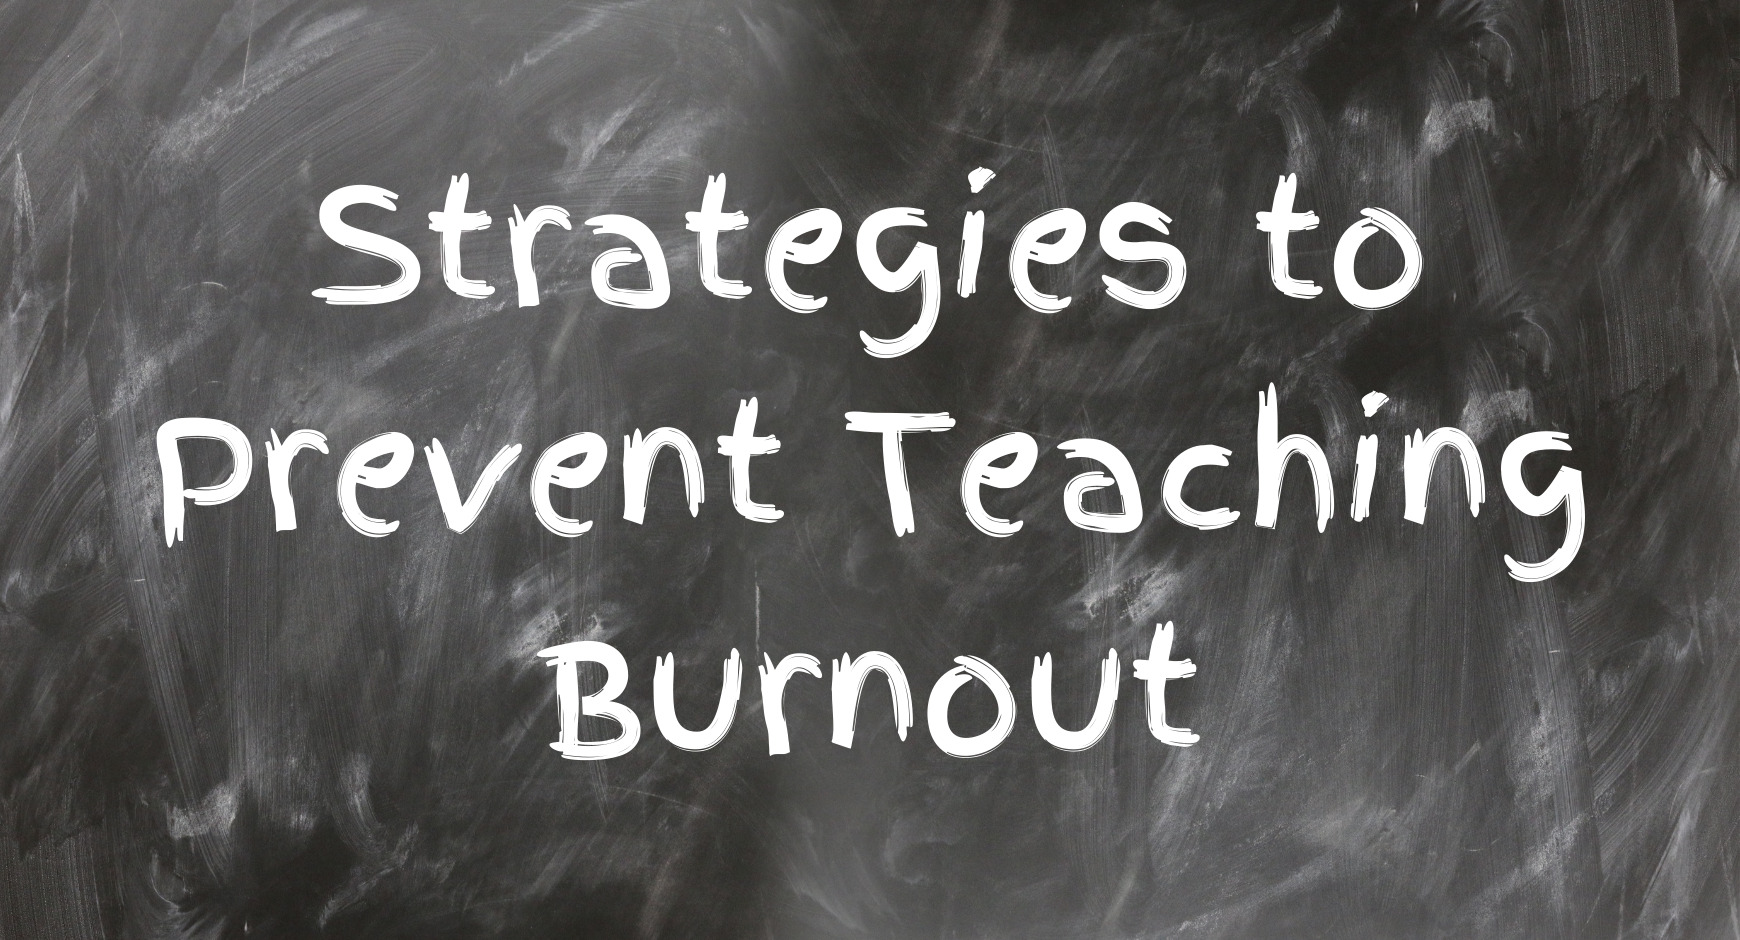 Words on a chalkboard that read "Strategies to Prevent Teaching Burnout"